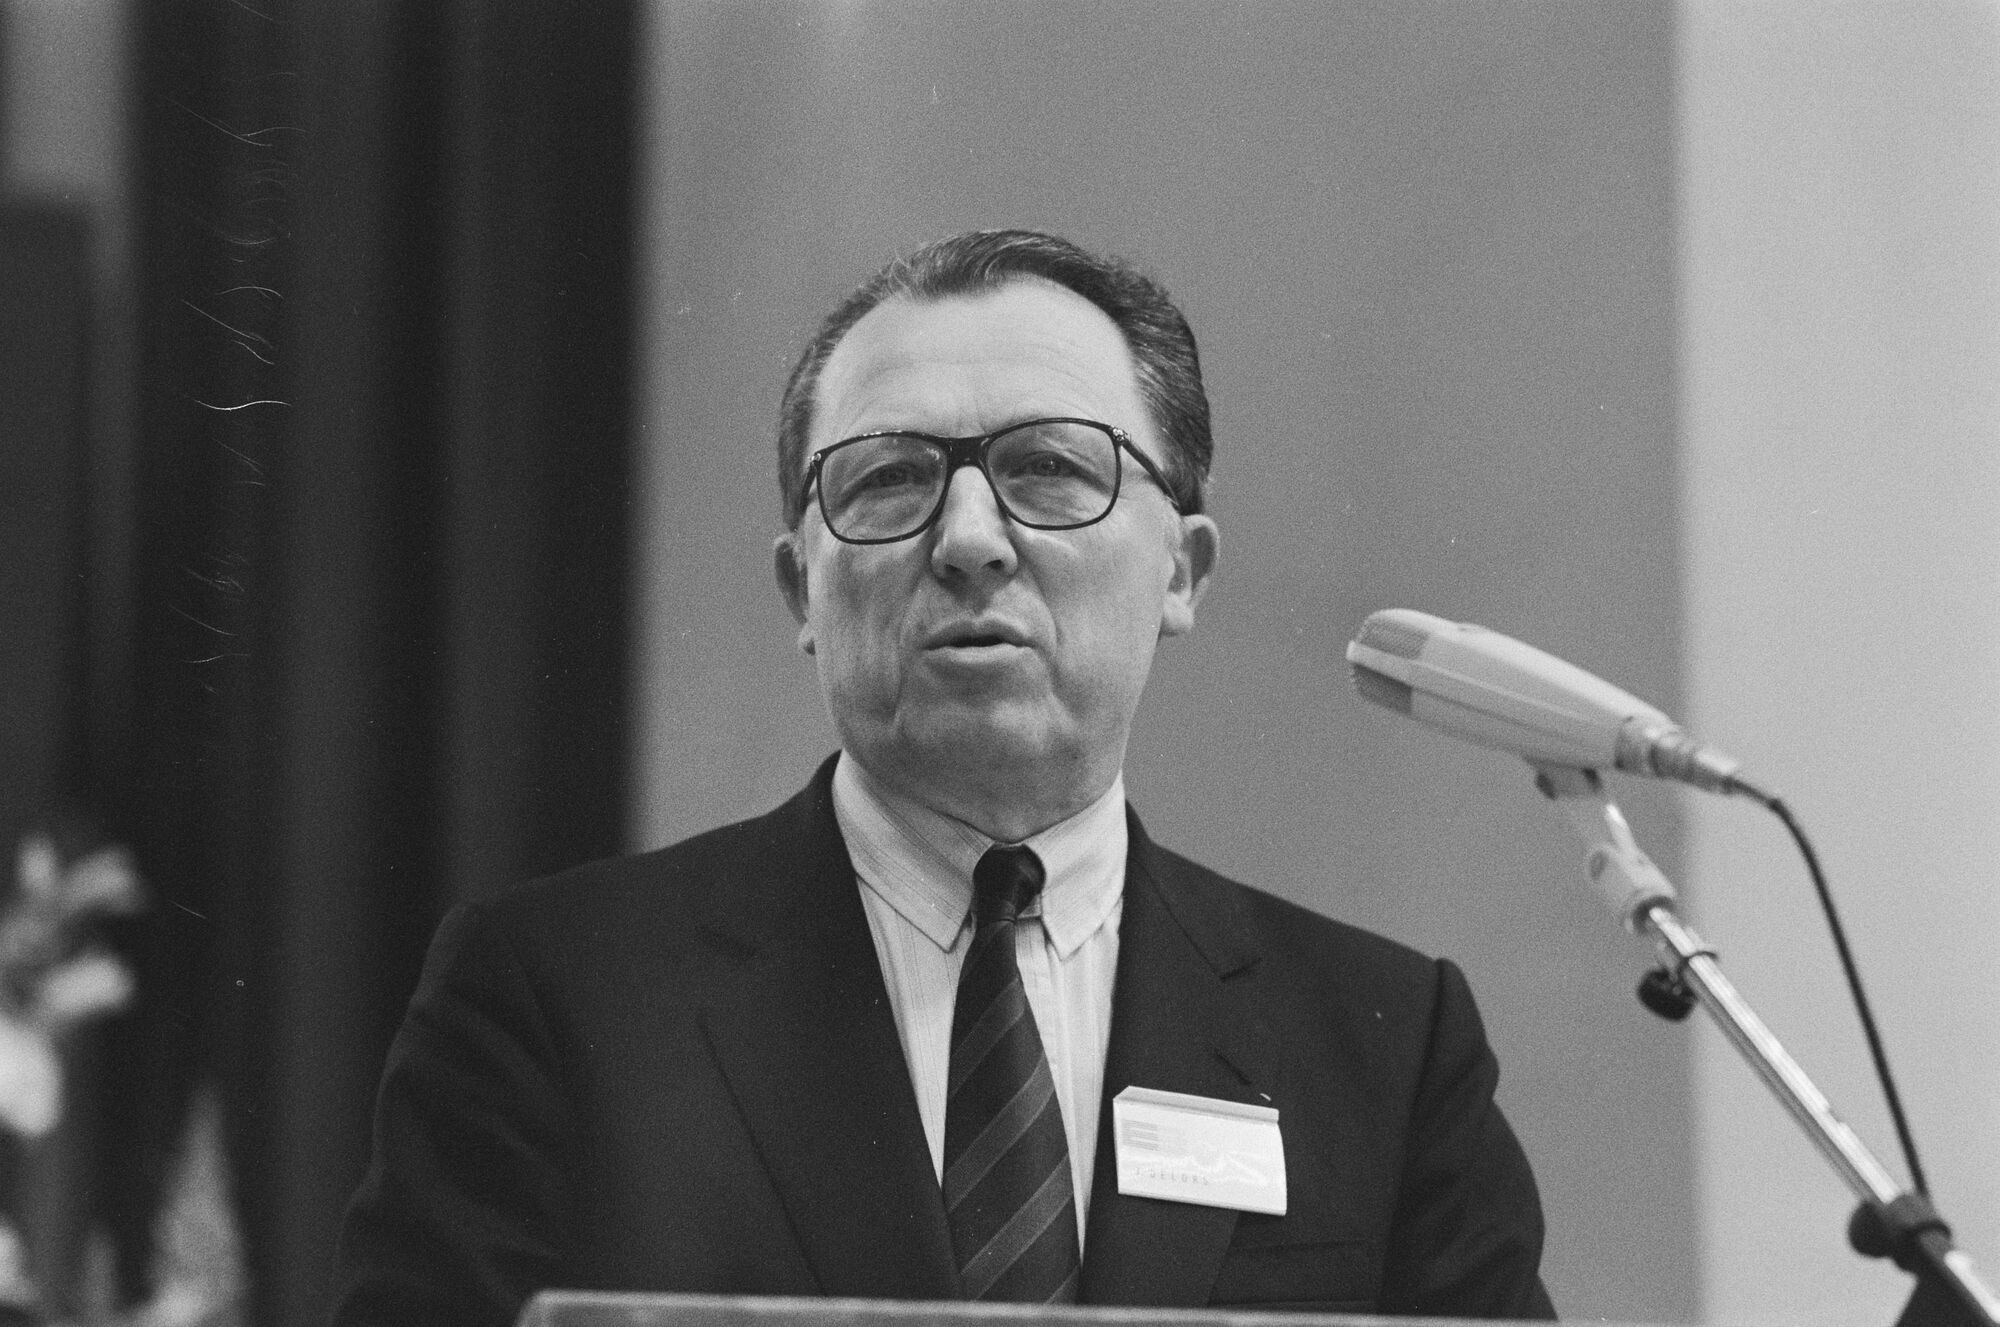 The black and white photo is a portrait of Jacques Delors during a speech. The photo is from 1988 Wikimedia CC0